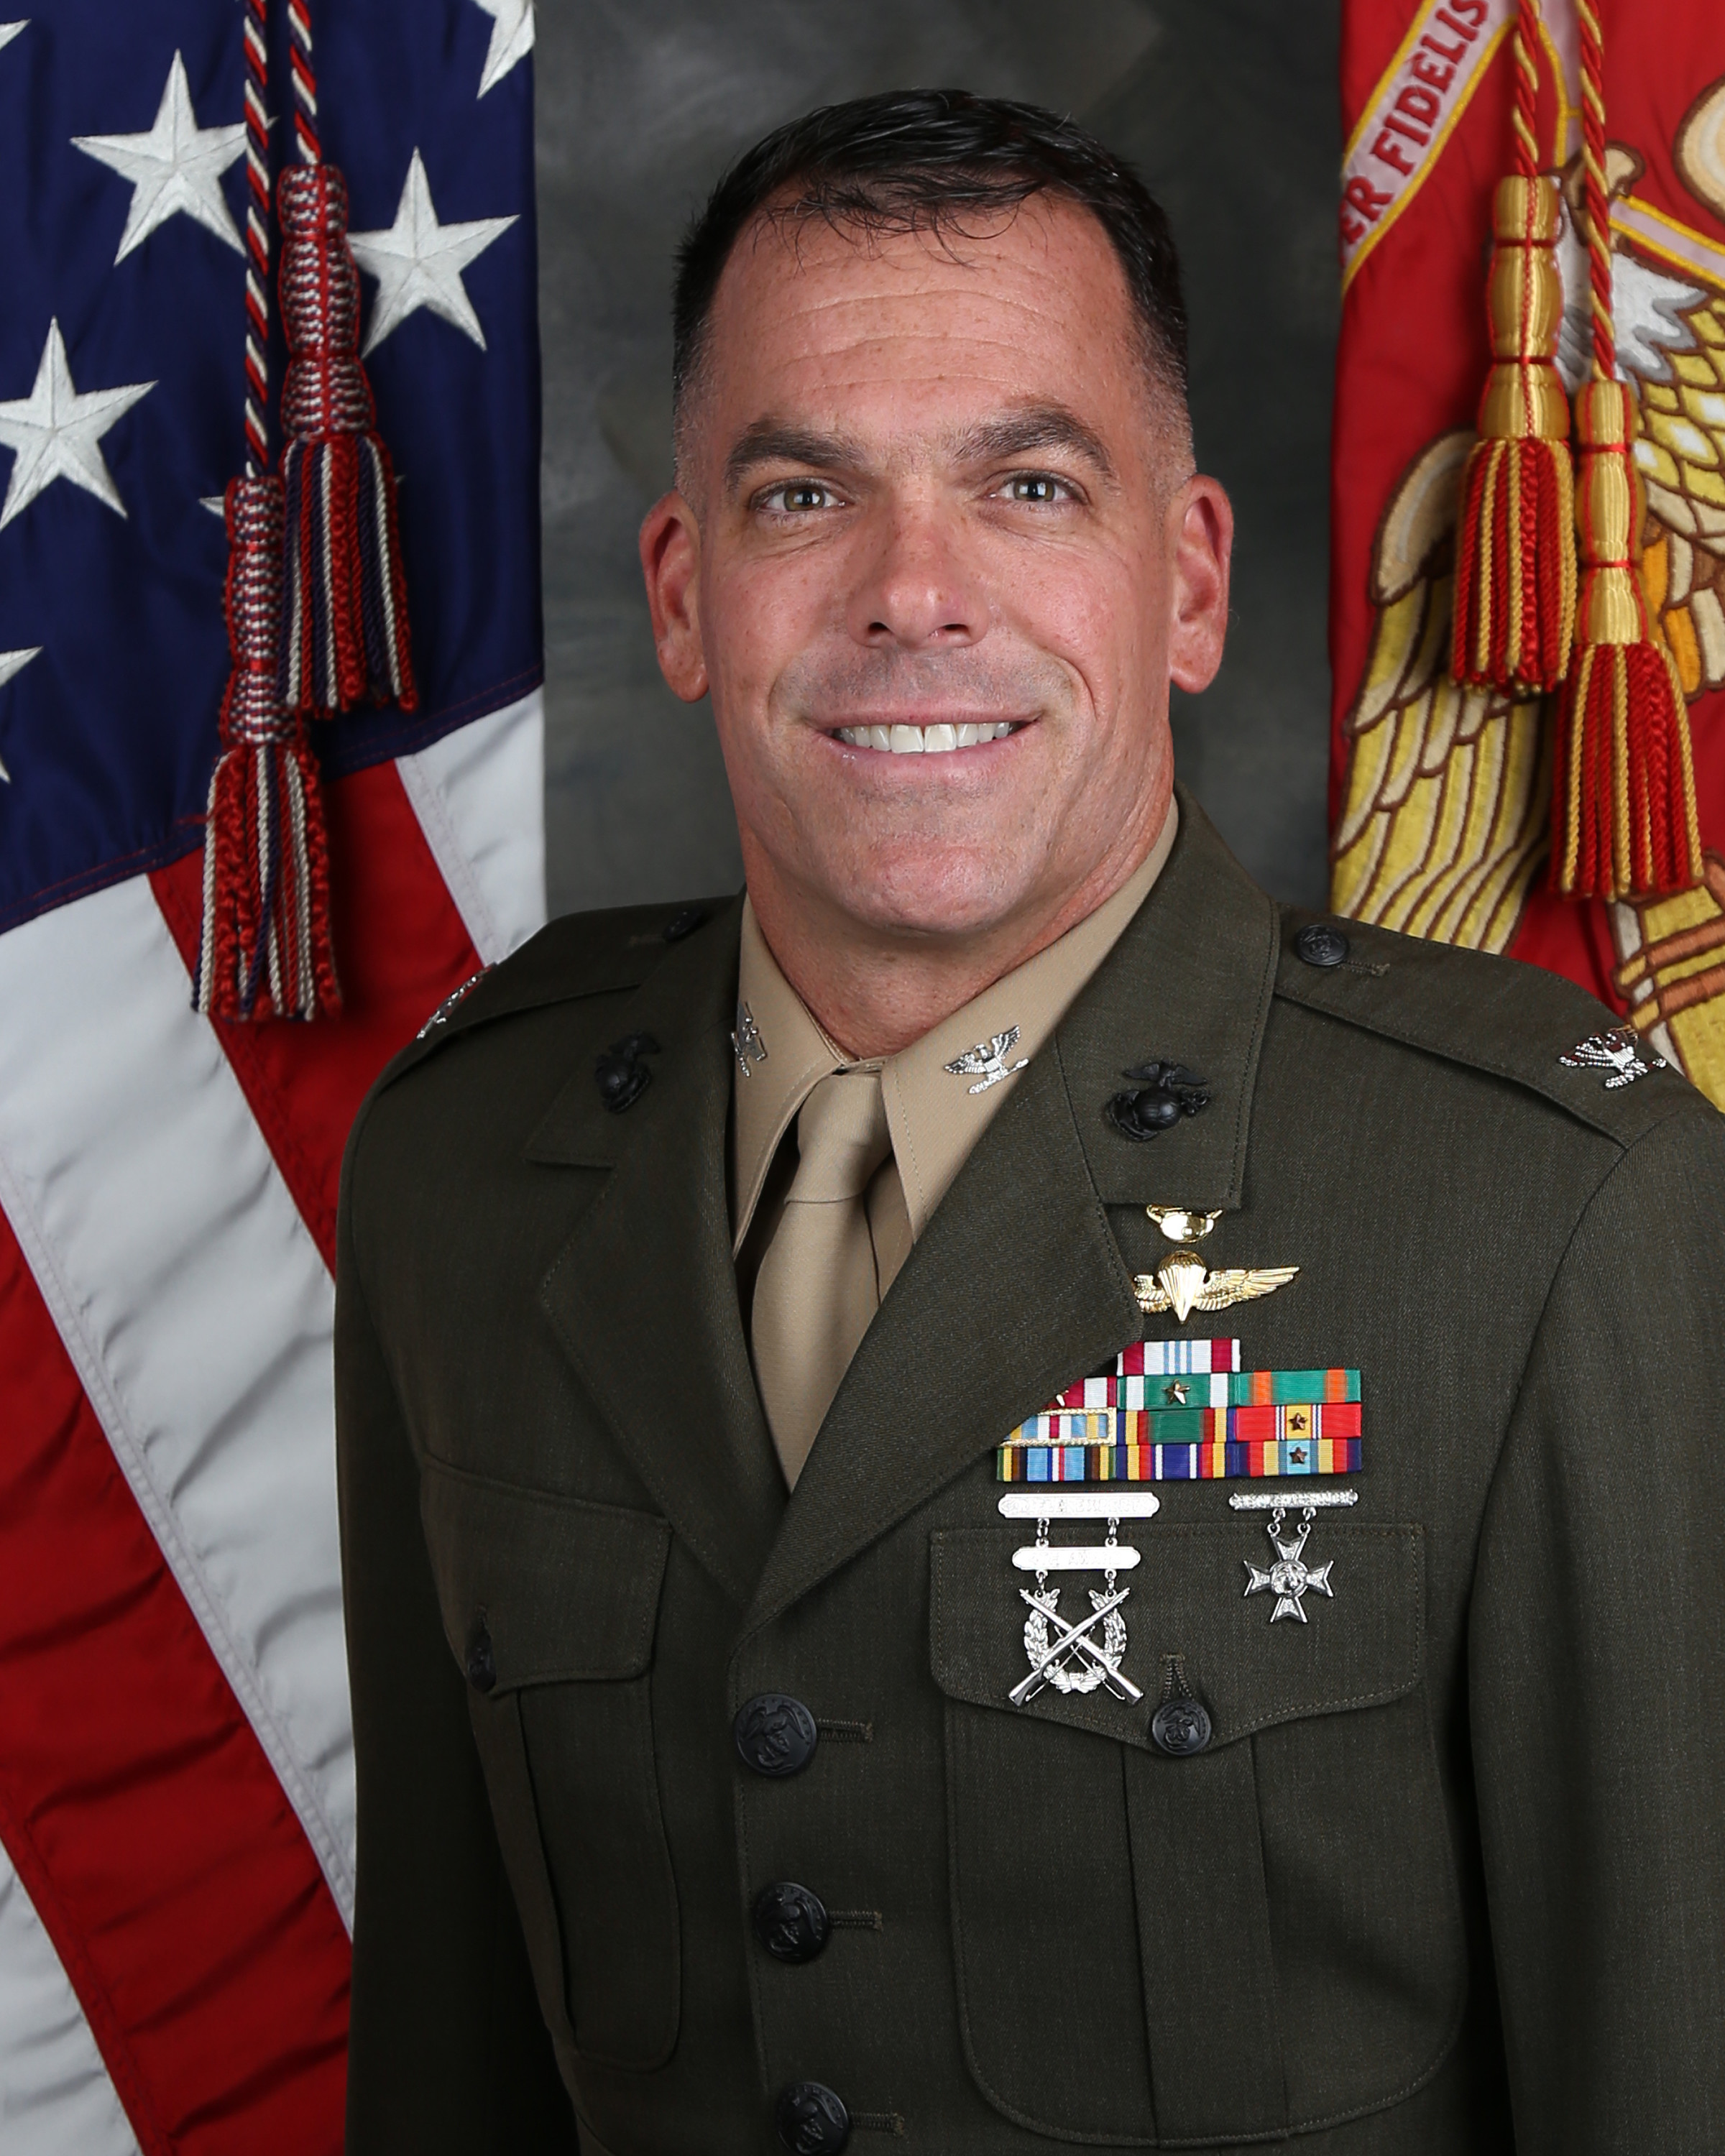 PEO MLB names Marine Corps Col. Robert Bailey as new Portfolio Director marine corps systems command small business office